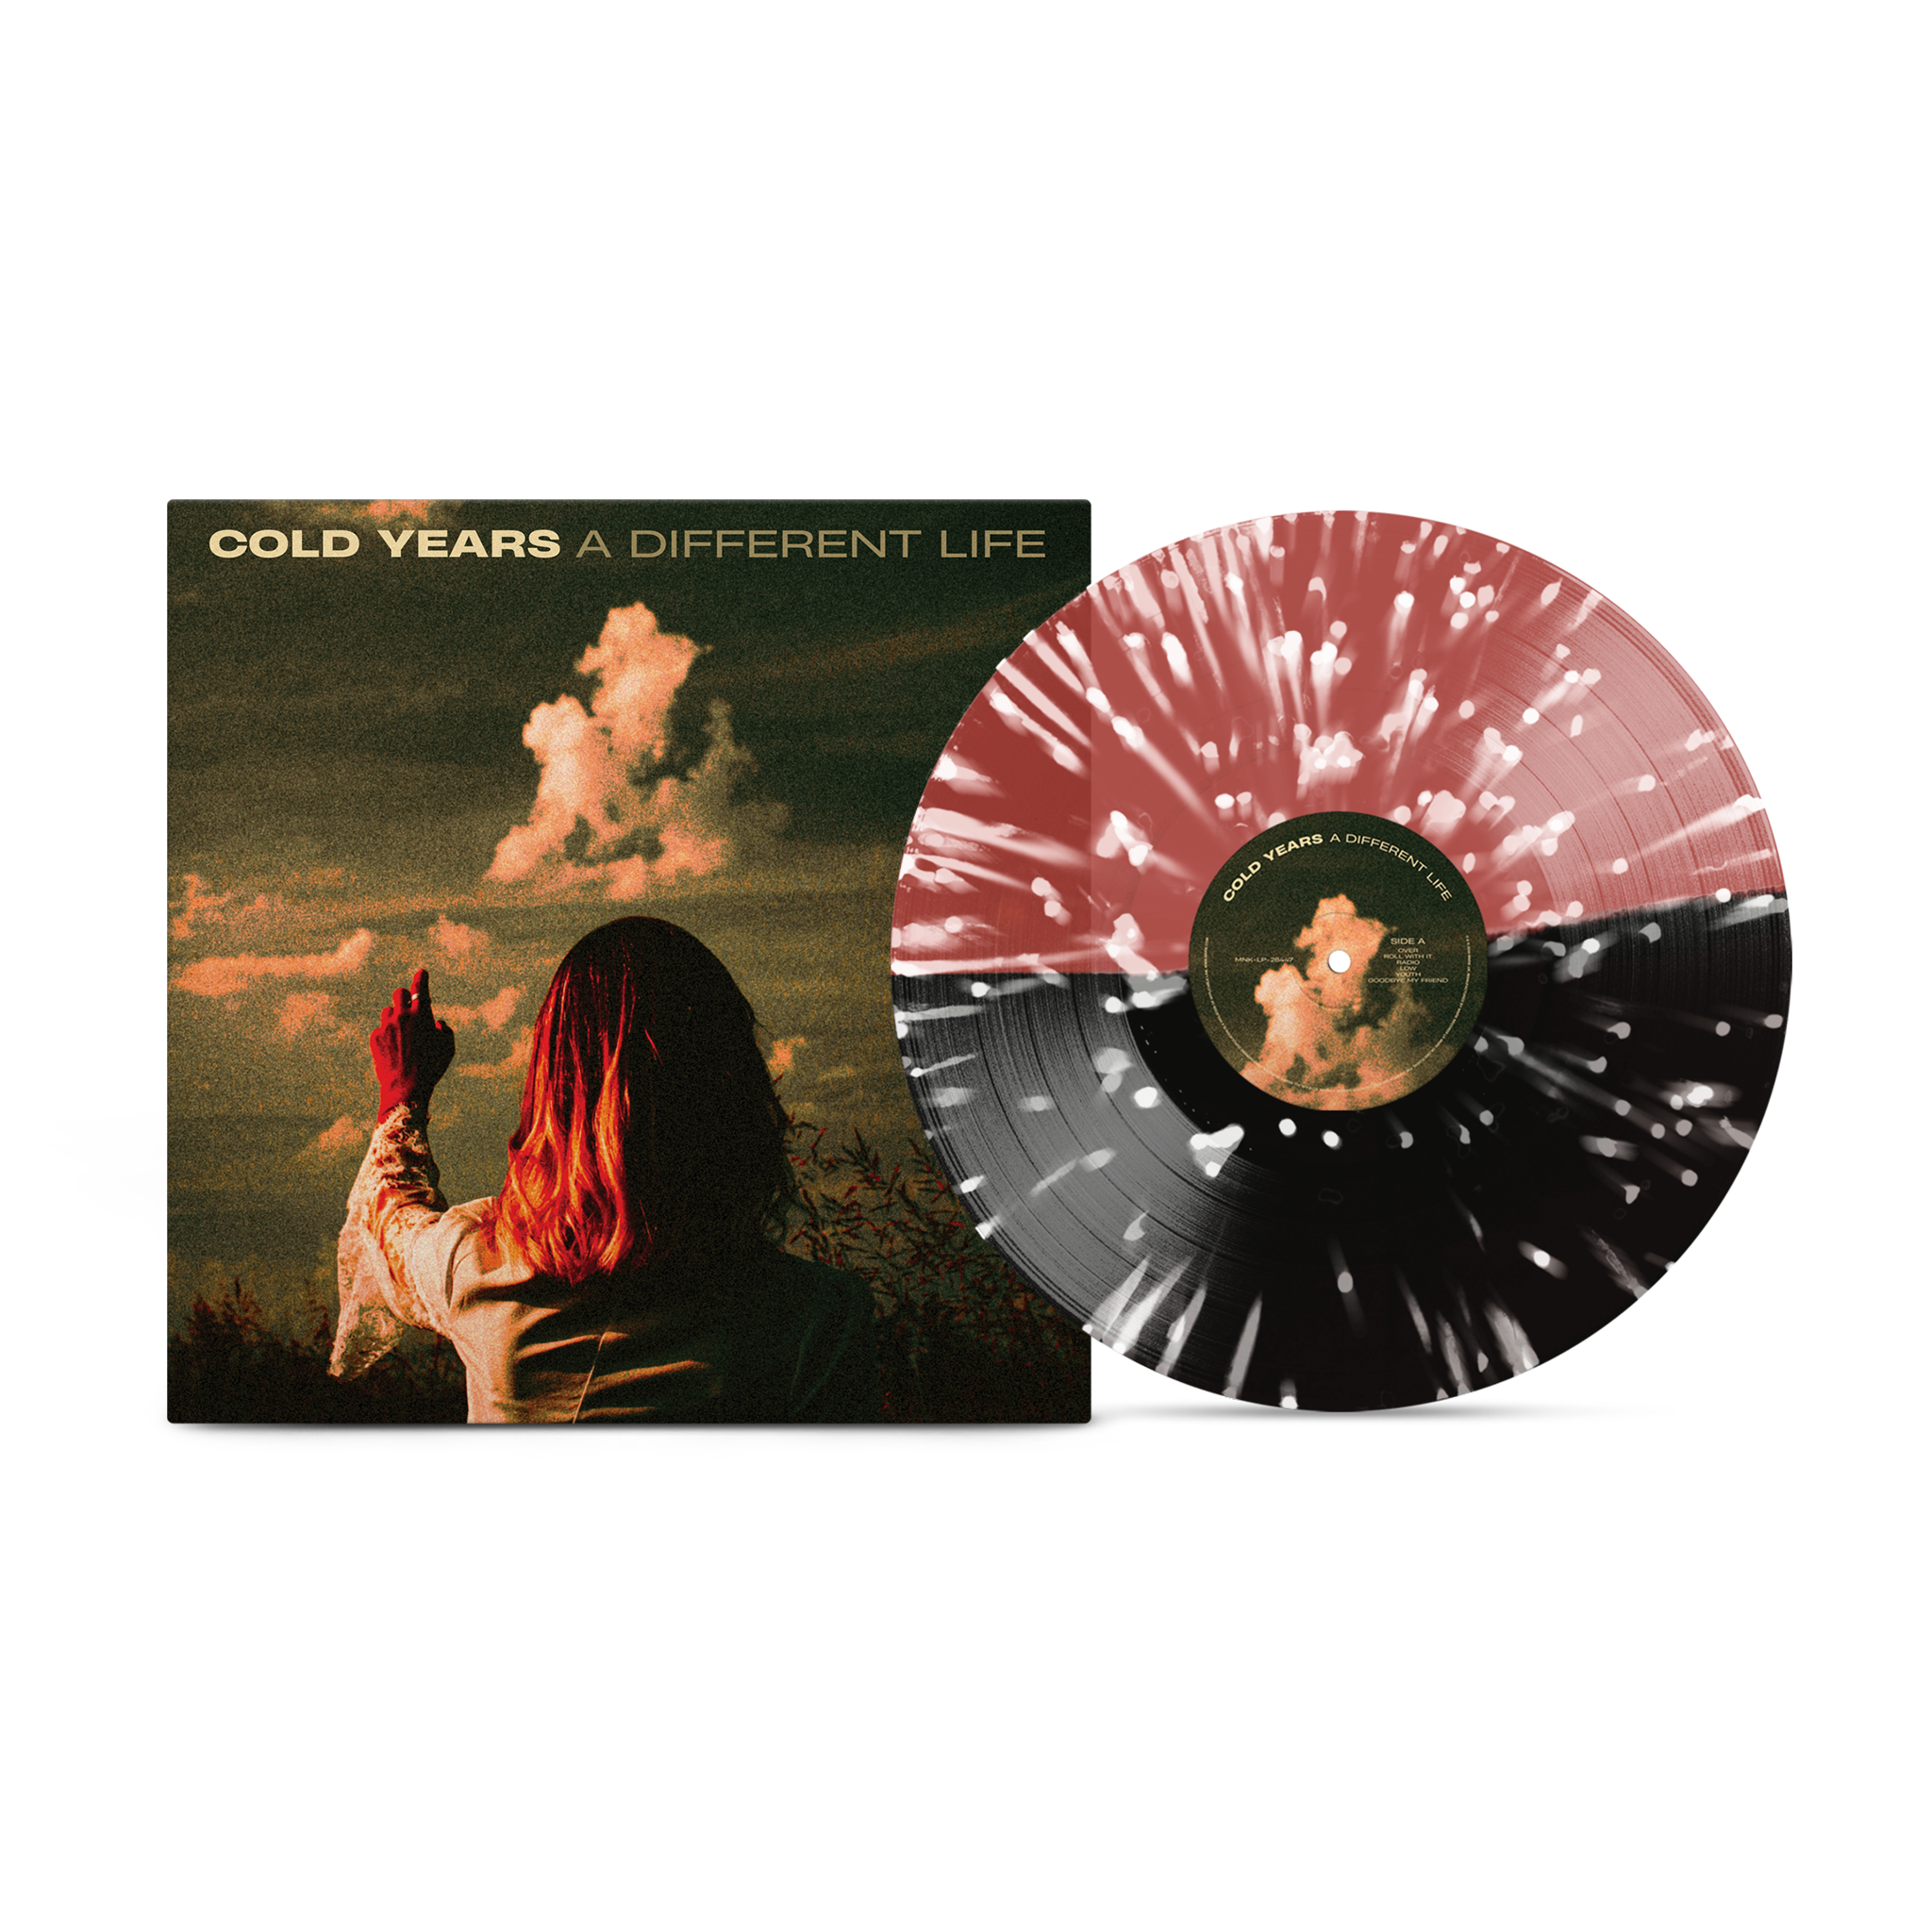 Cold Years - A Different Life Available on Splatter Vinyl